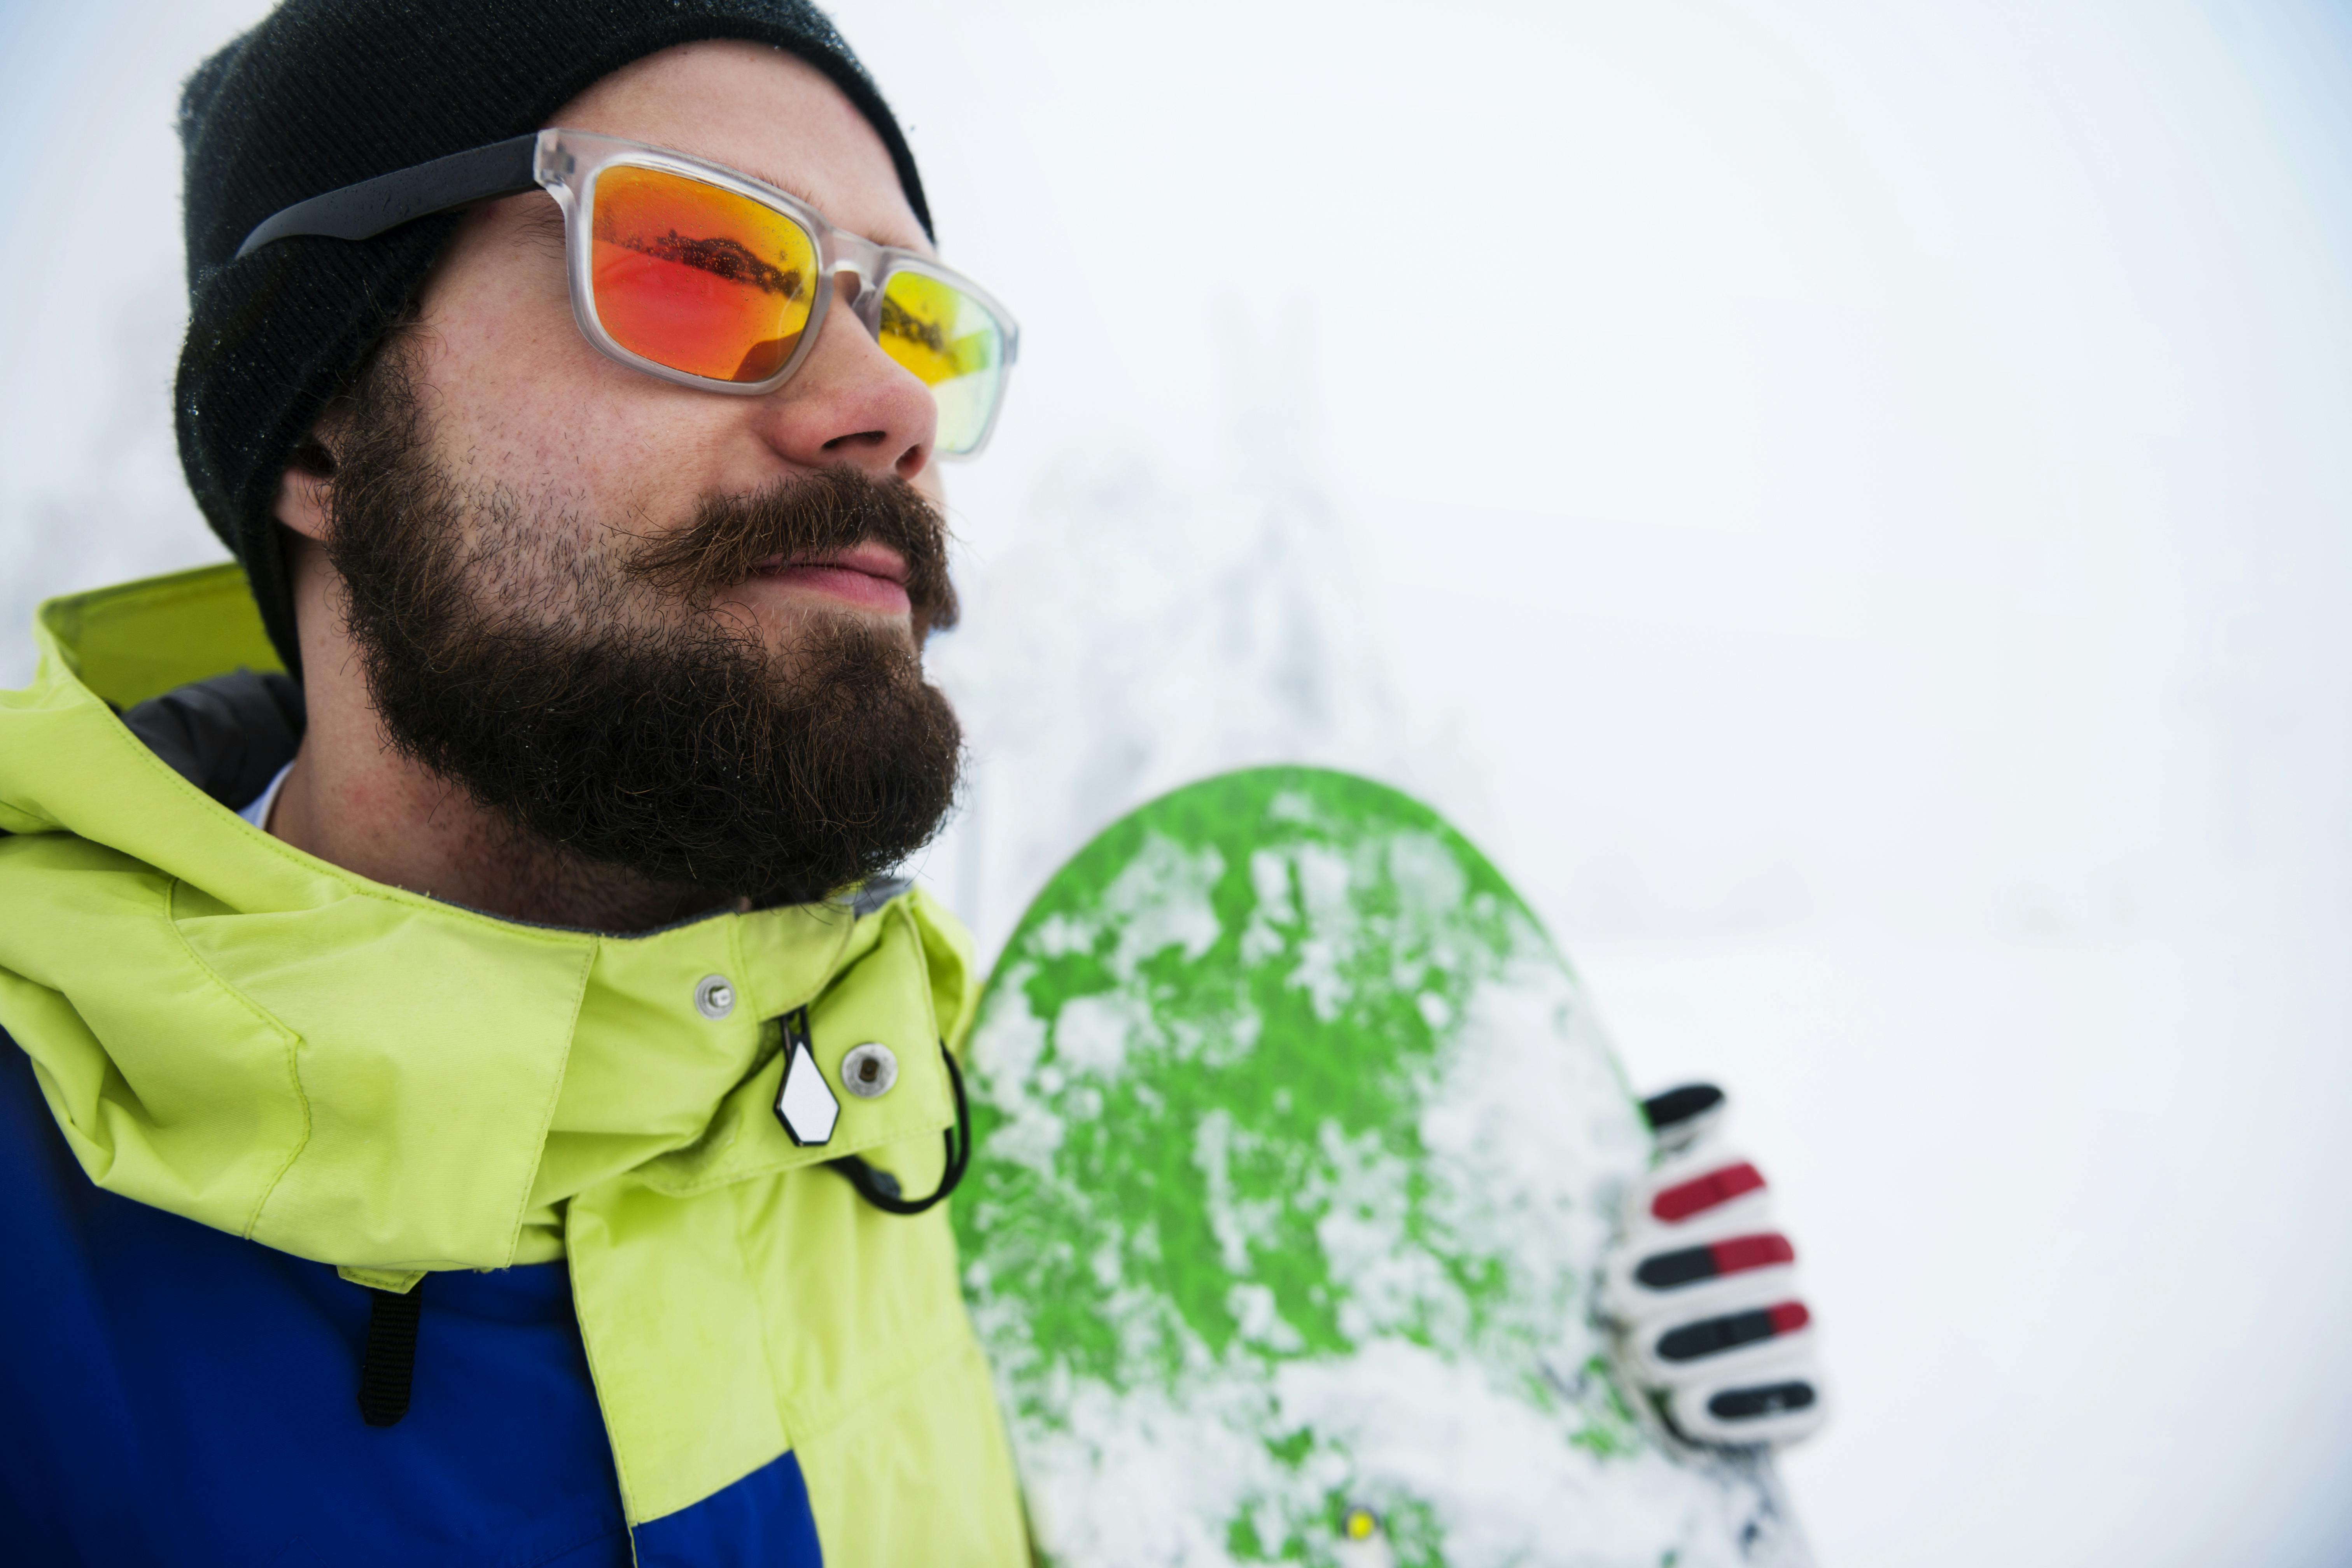 5 Reasons for wearing Glasses while Snowboarding